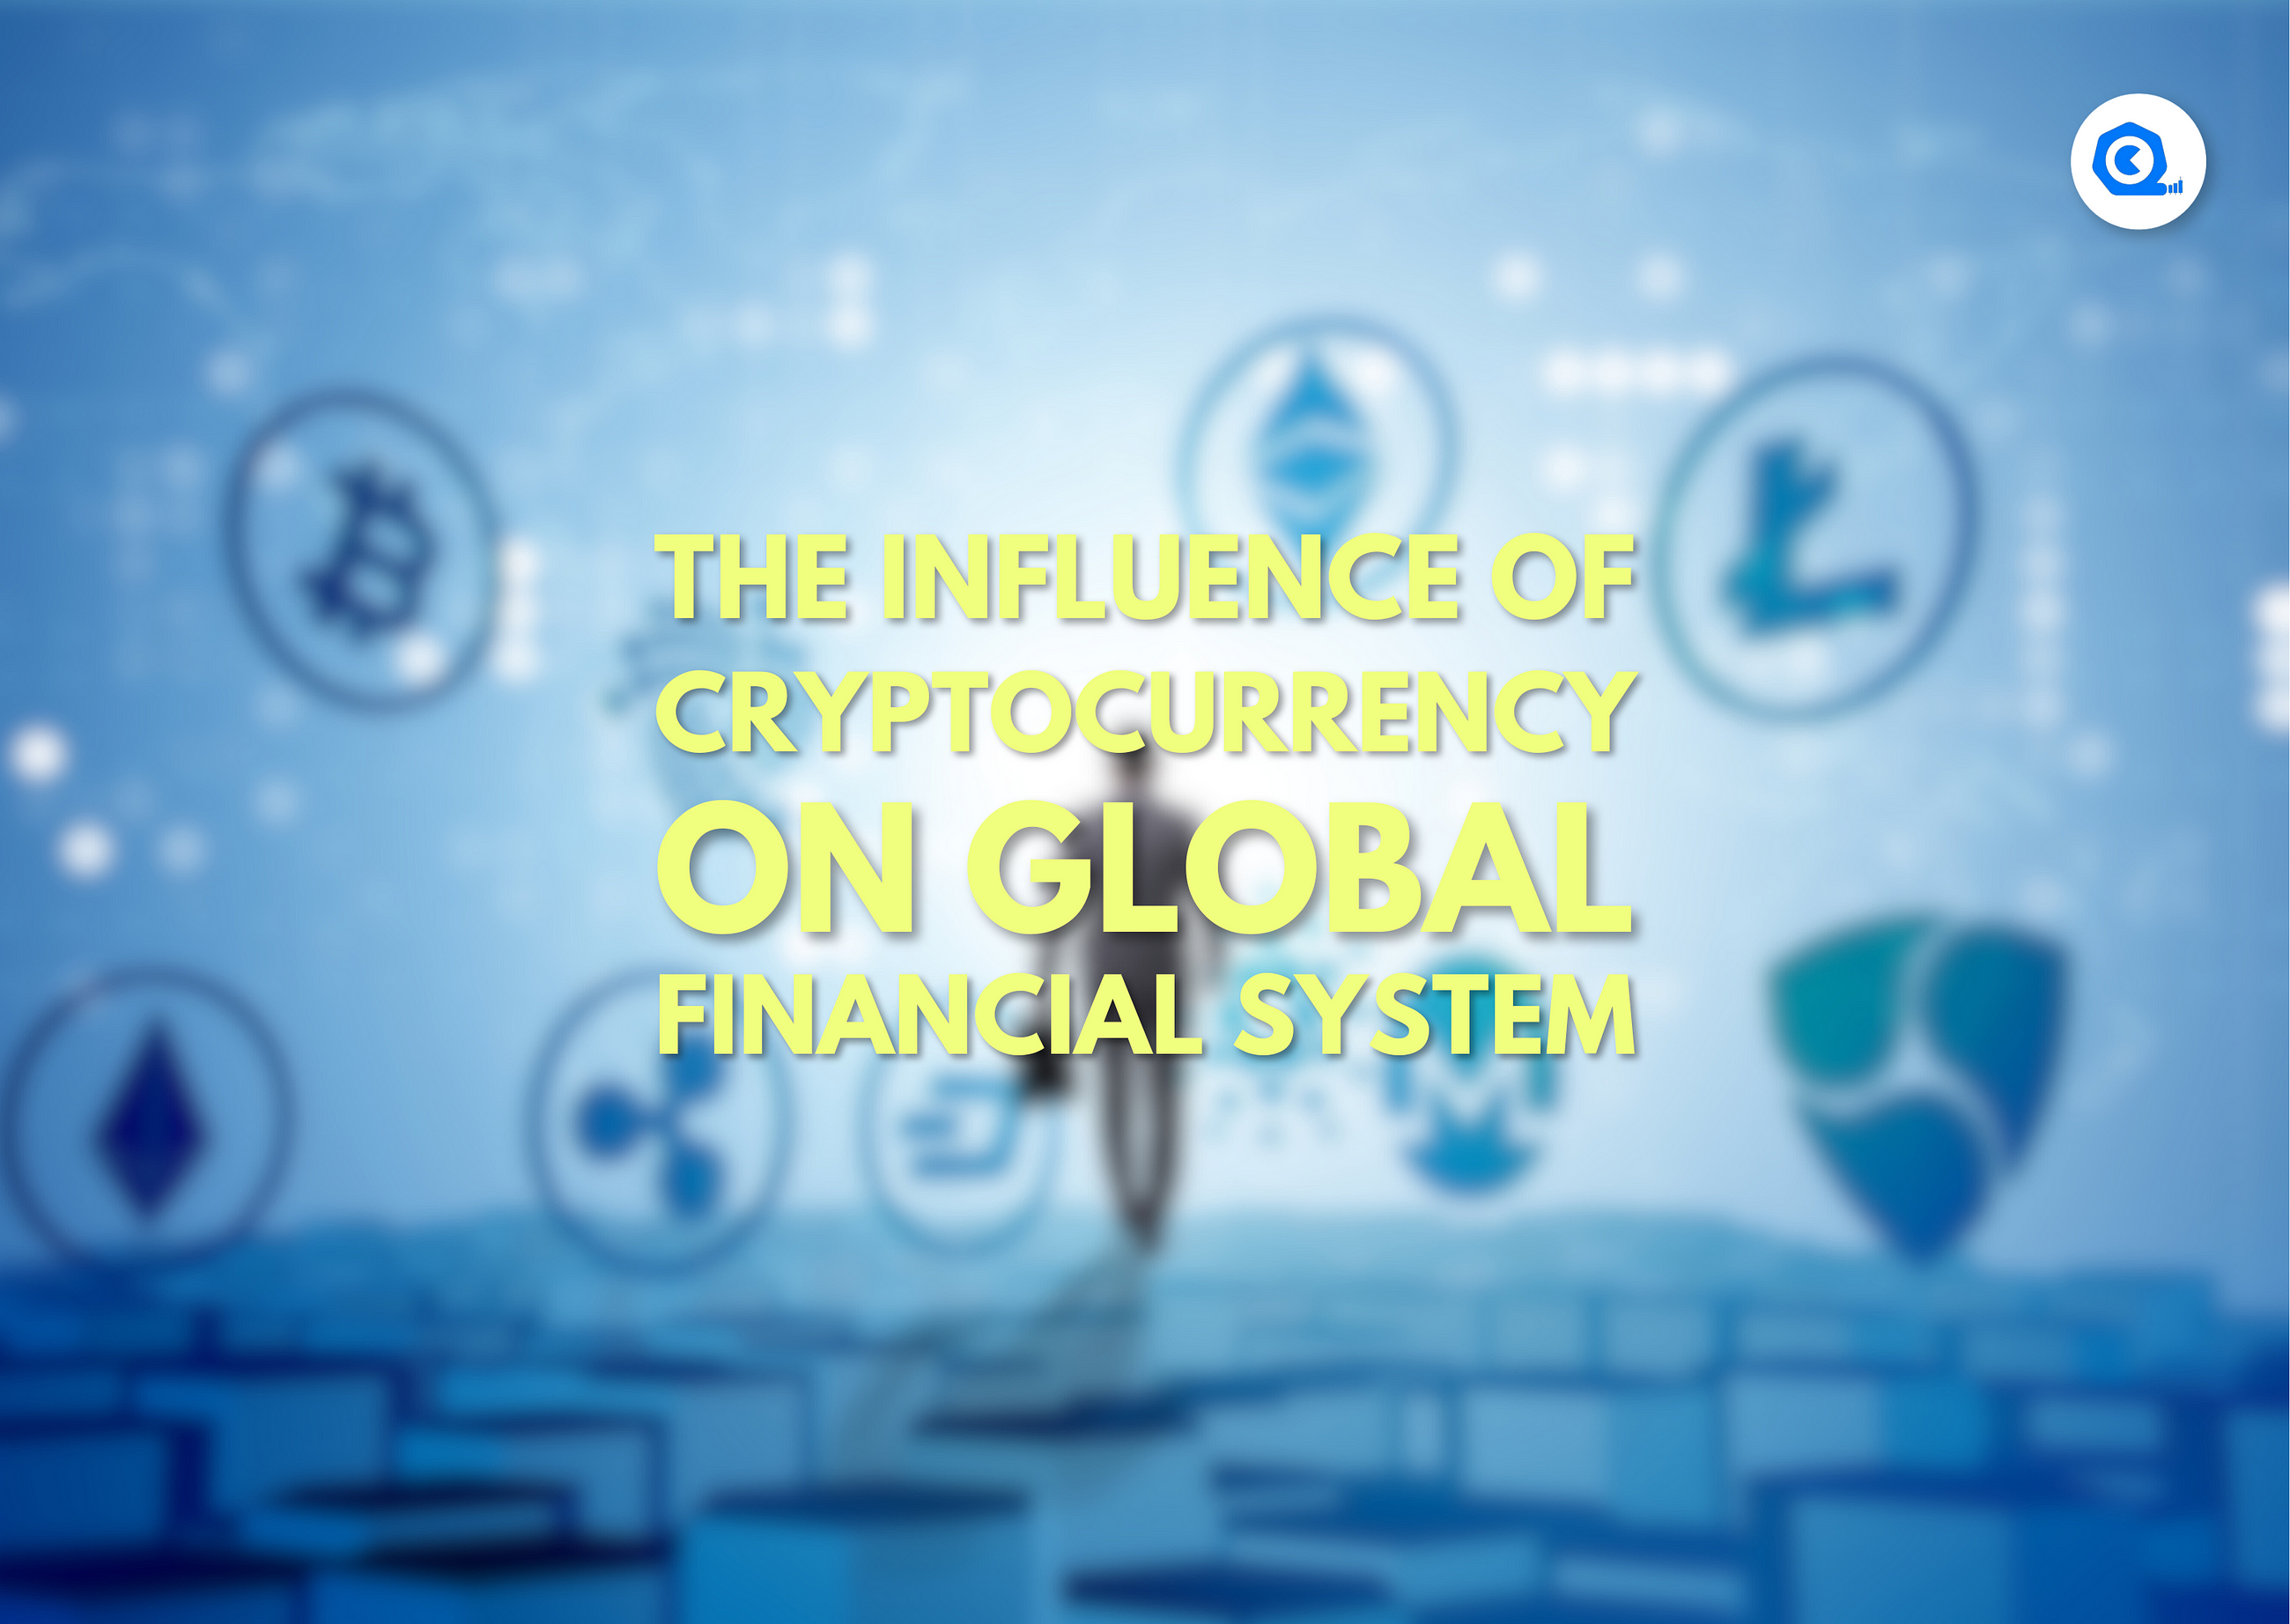 The Influence of Cryptocurrency on Global Financial Systems: Disruption and Transformation